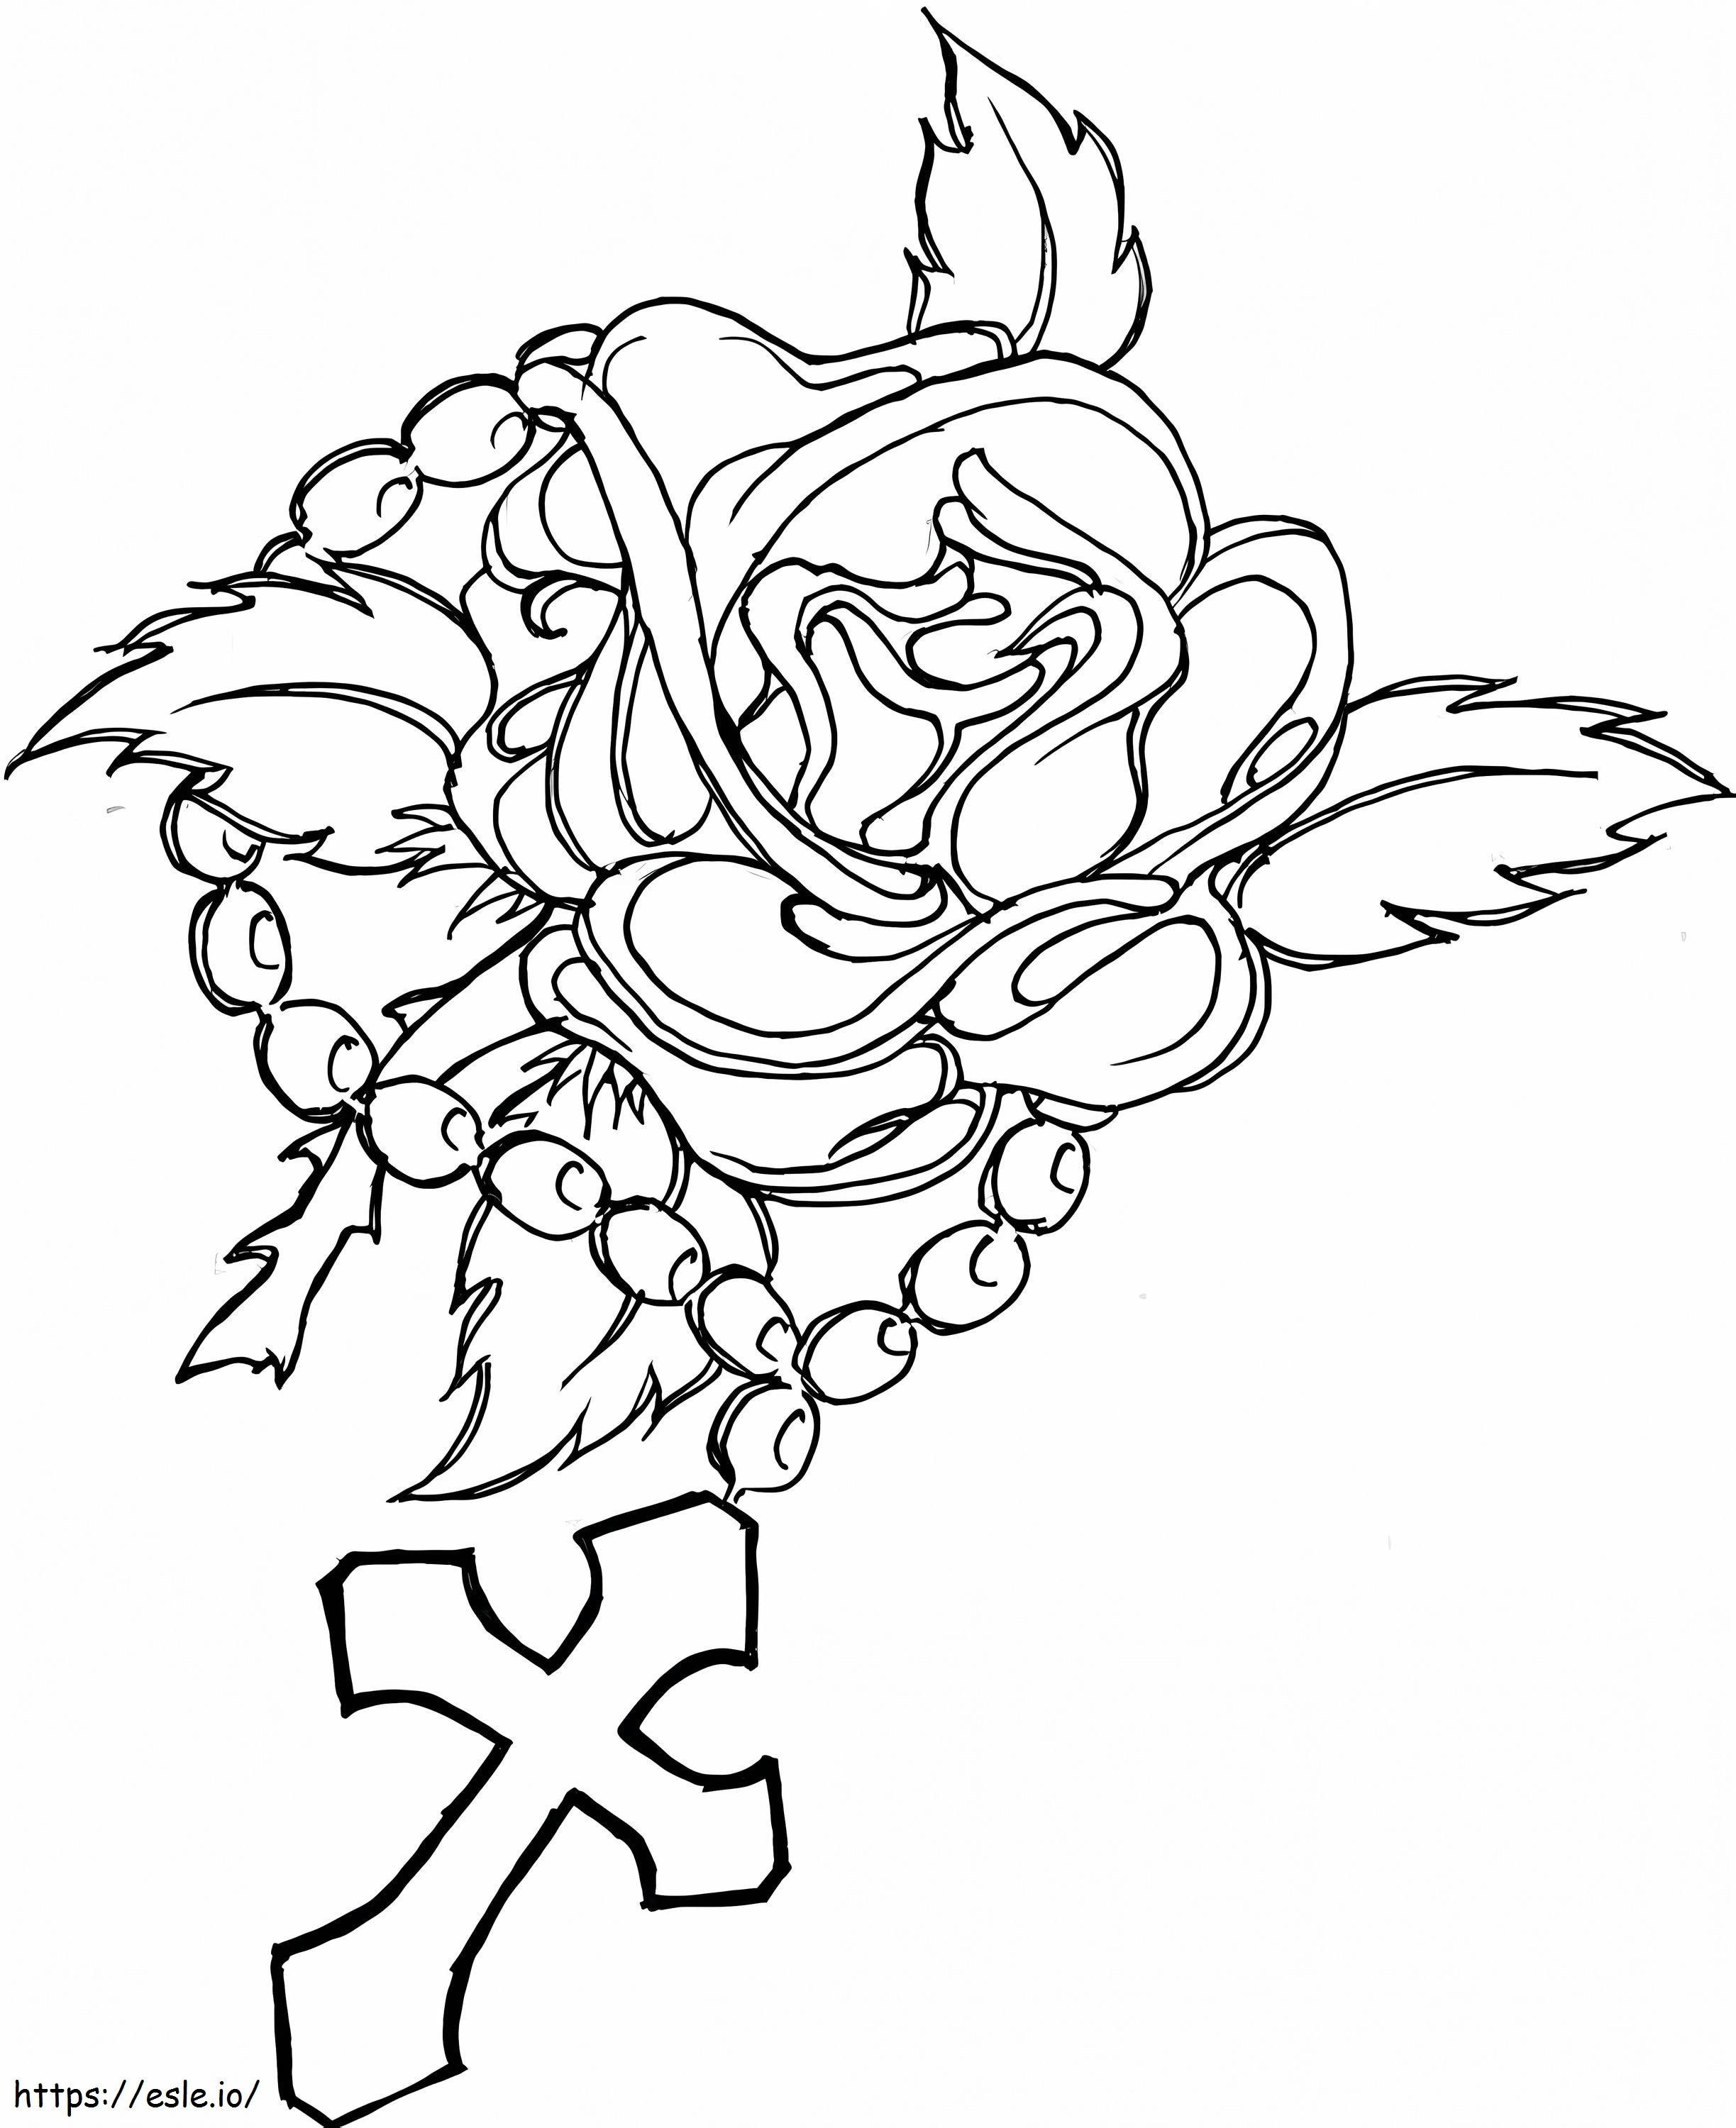 Cross With Roses coloring page